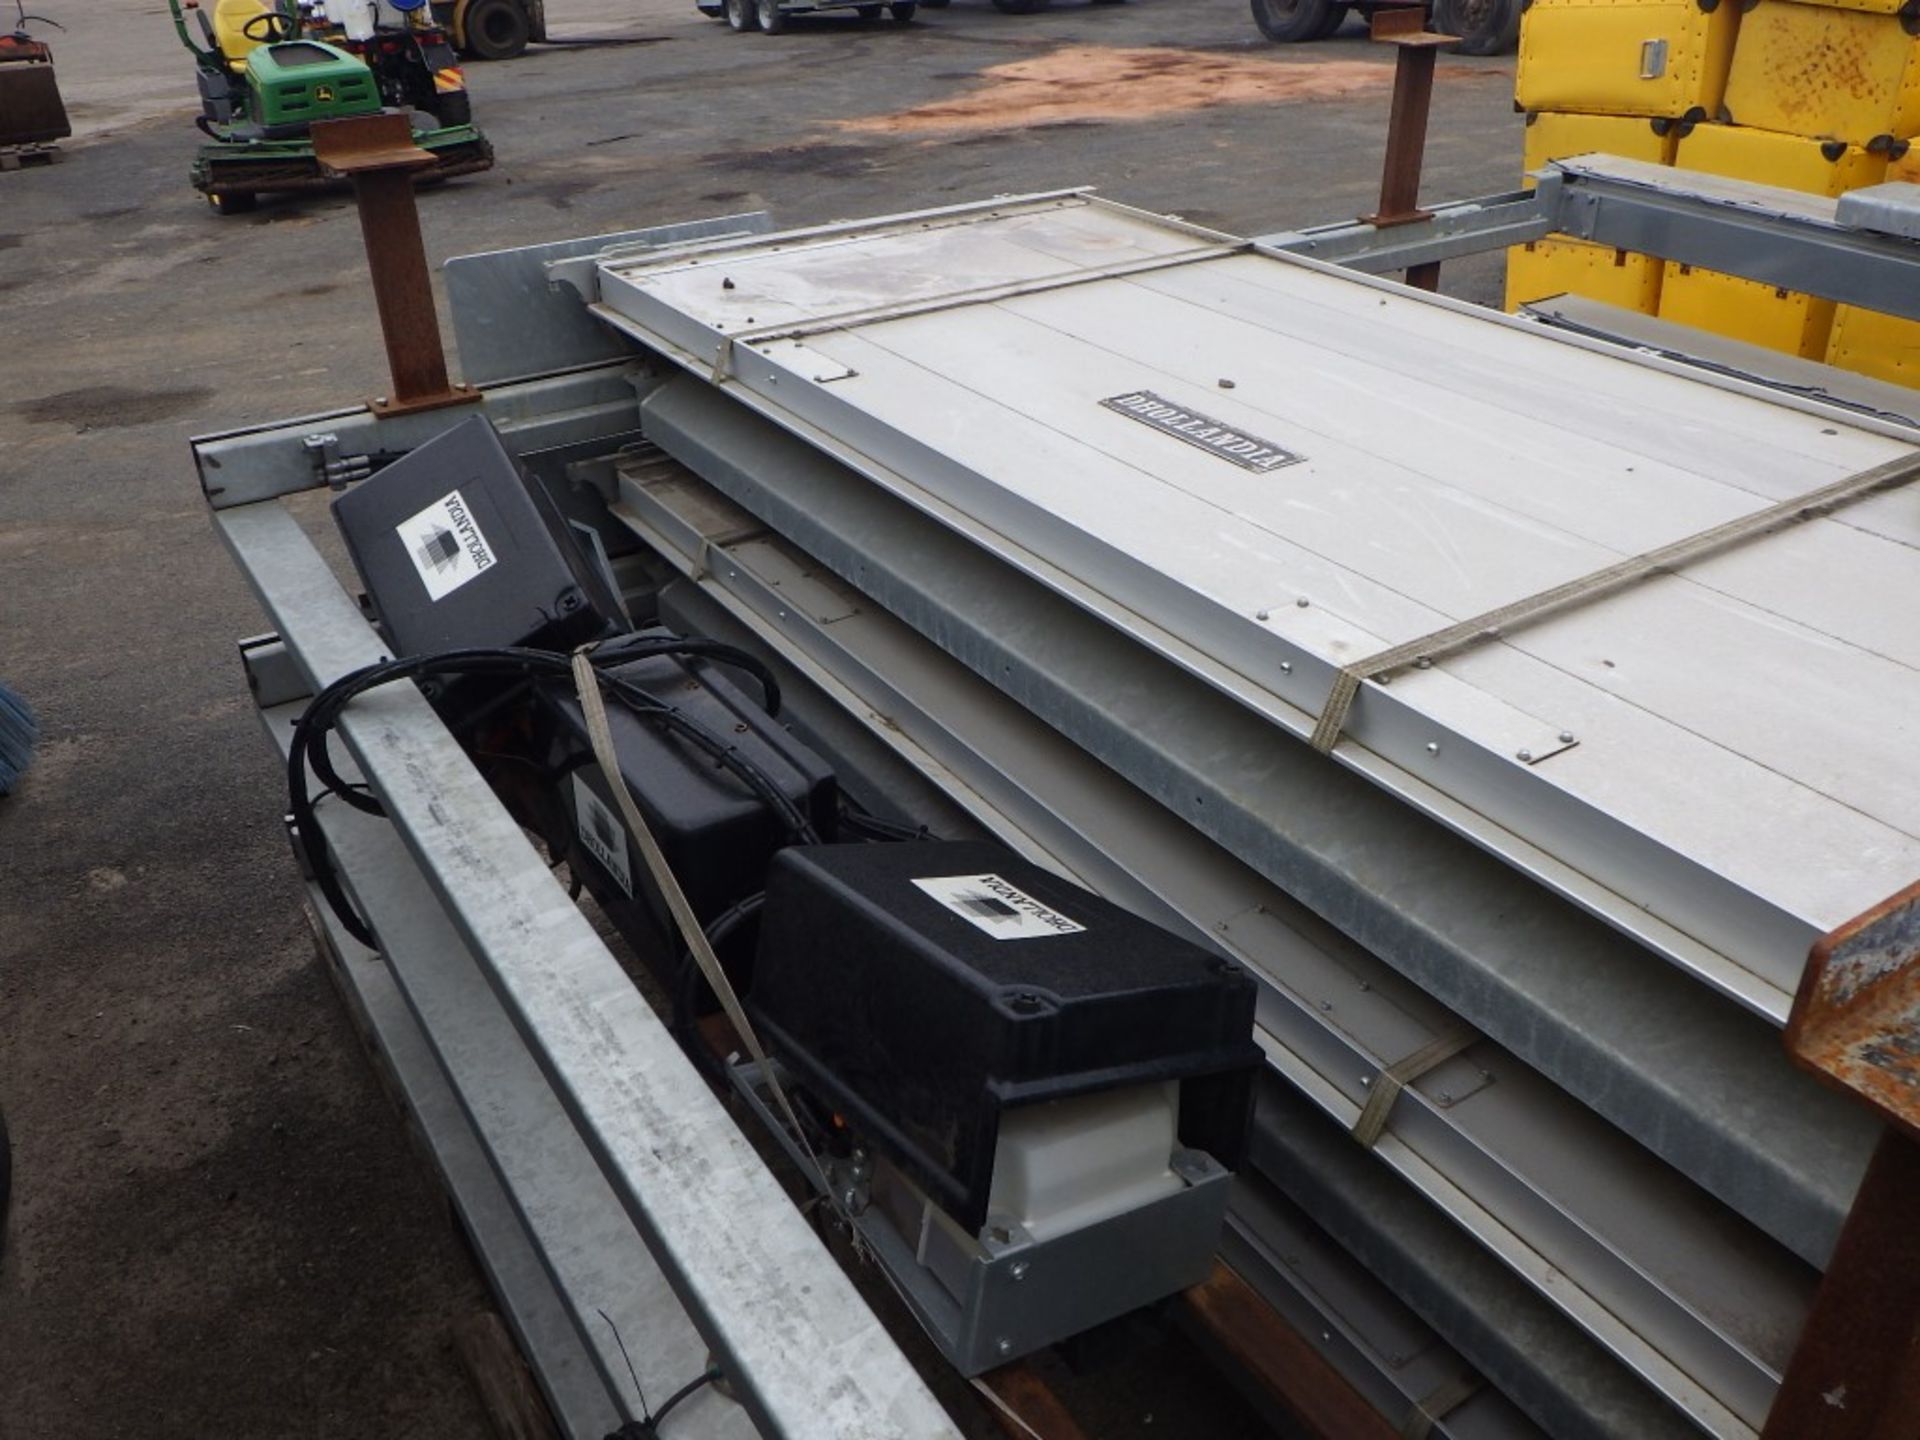 Dhollandia Column Tail Lift (3 of) - Image 6 of 9